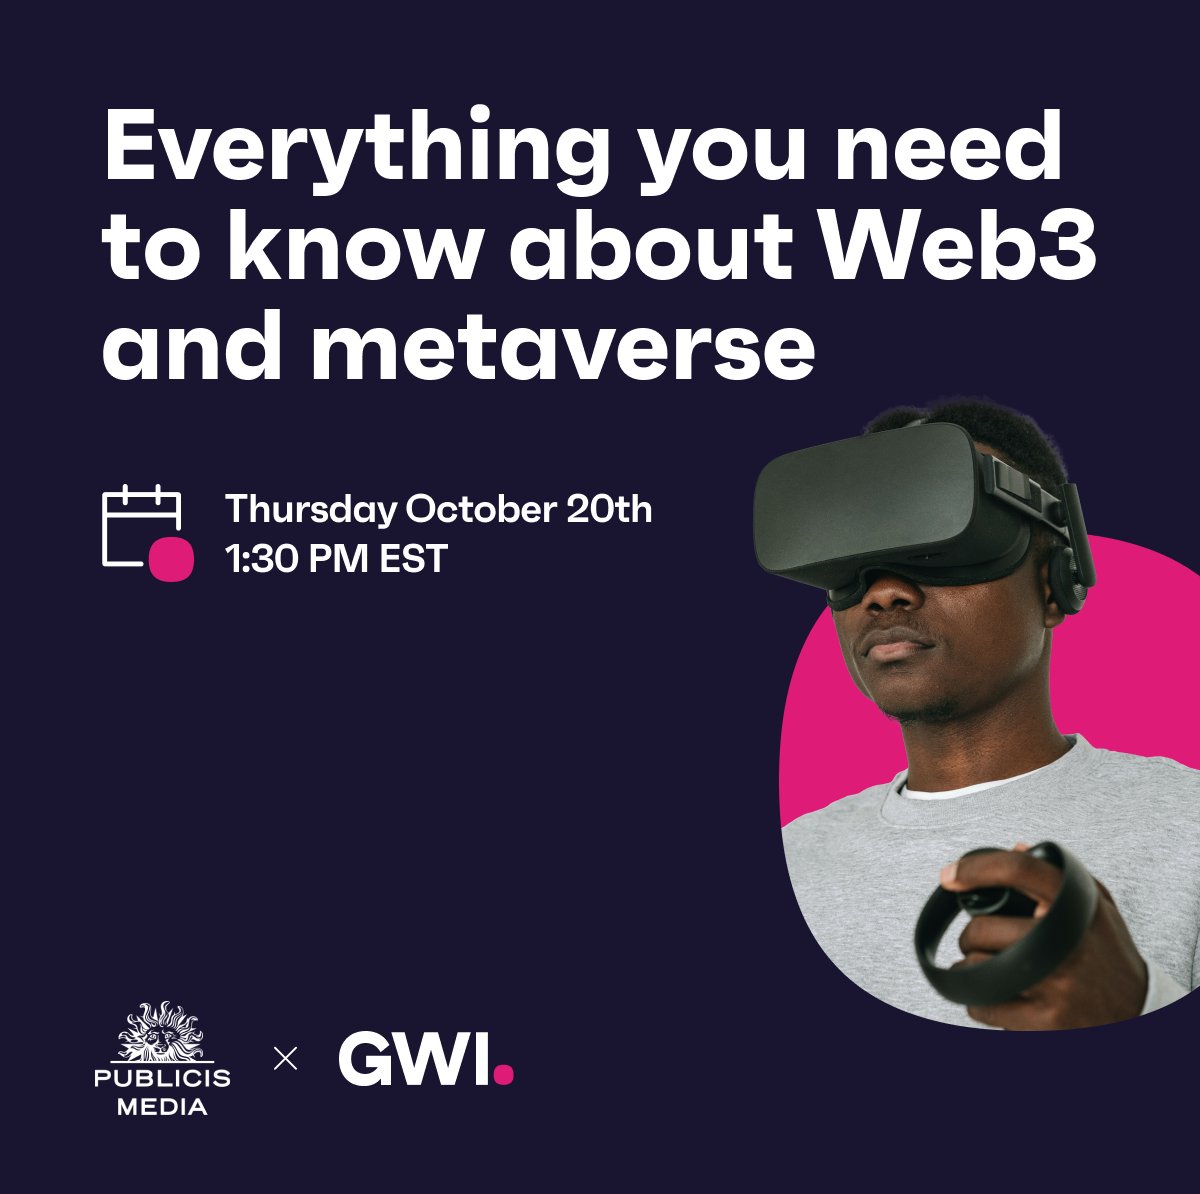 Do you care about Web3 and the metaverse? Then this session is for you #AWNewYork ⏰ 1:30 PM EDT / 6:30 PM BST Everything you need to know about Web3 and the metaverse ft. @PublicisMedia 📍 The Boardroom 🎥 bit.ly/3CvhJaH